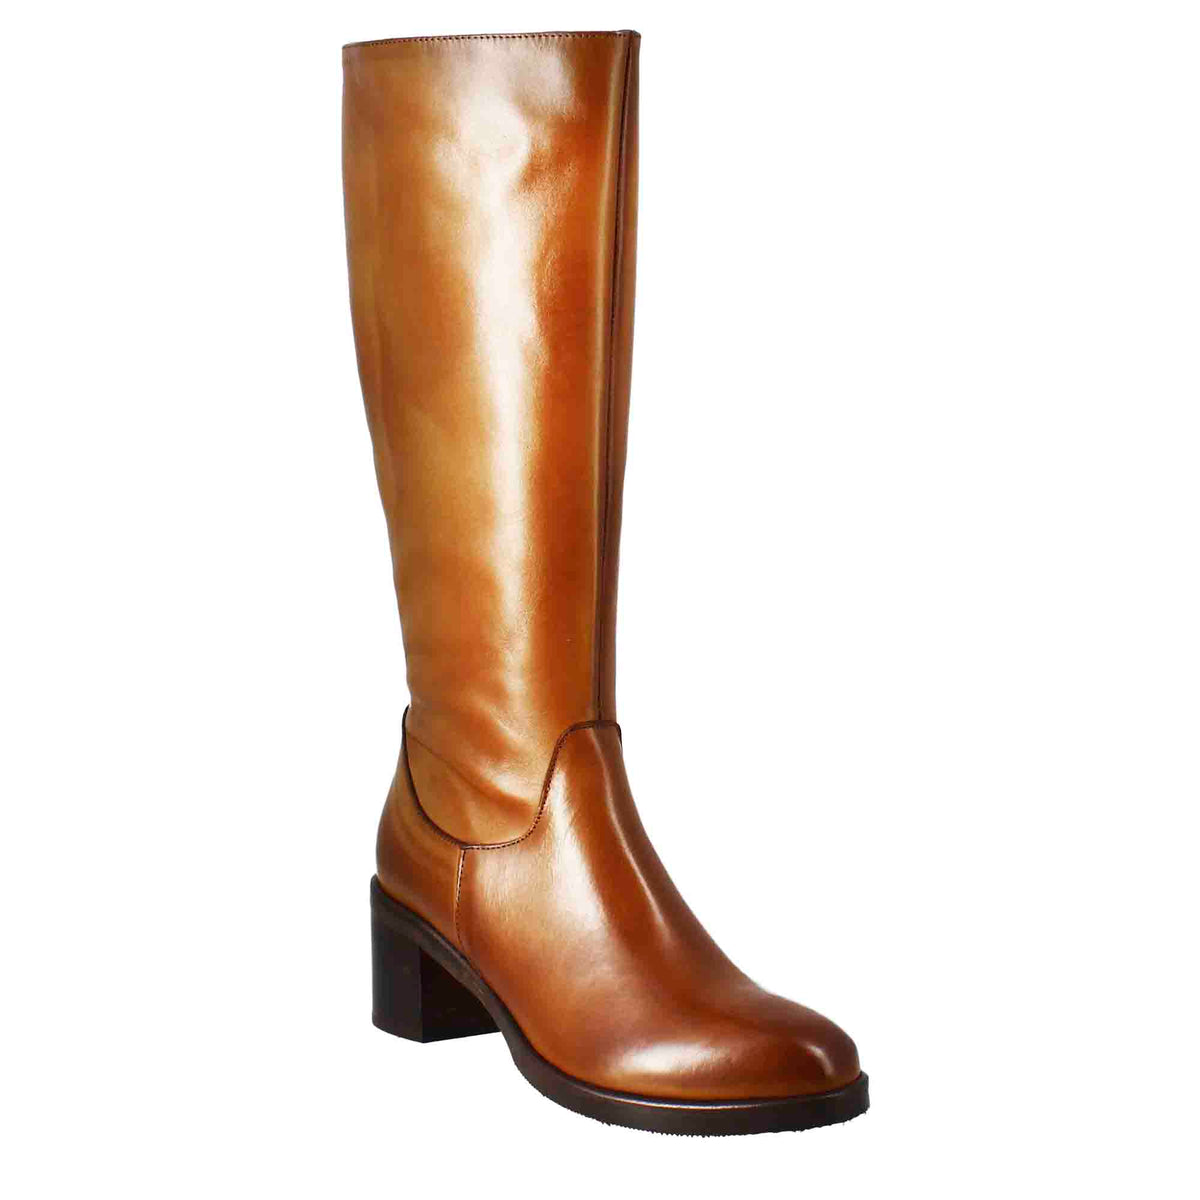 Smooth women's knee-high boot with medium heel in brown leather